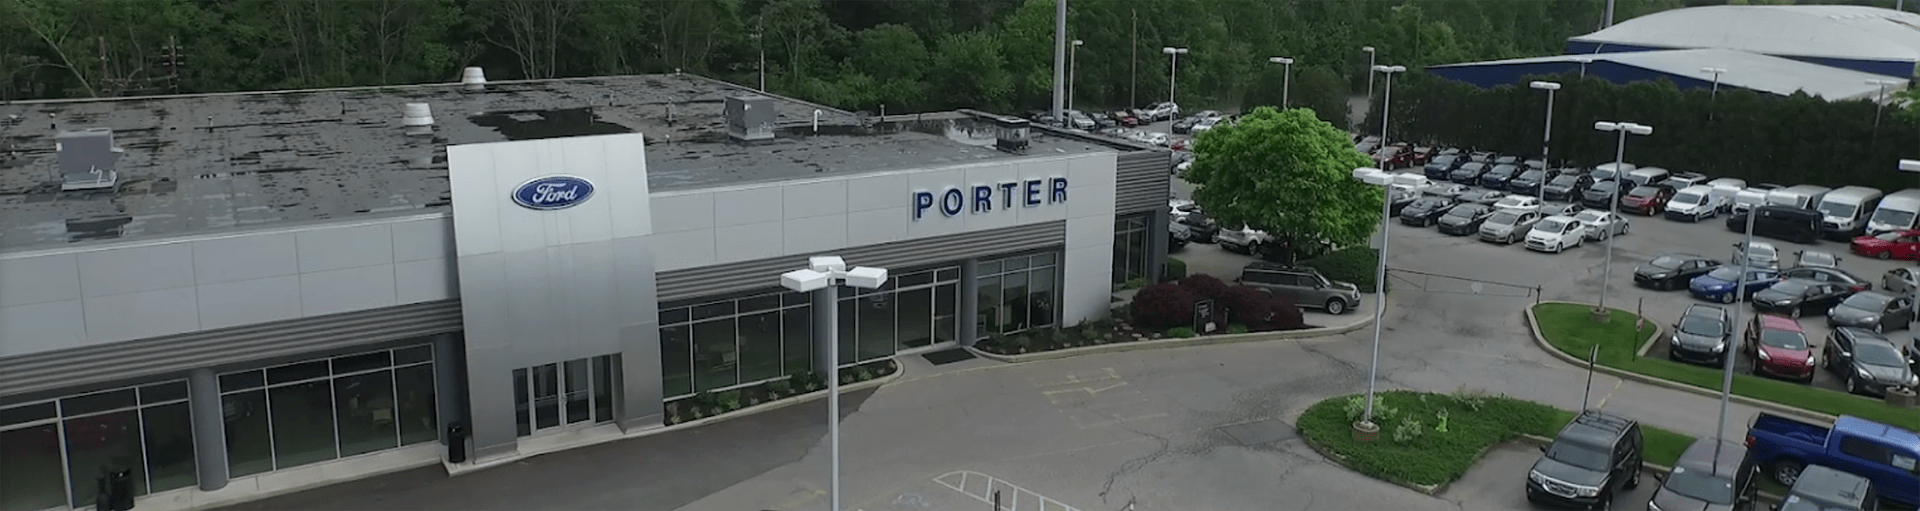 Porter Ford Tire Rotation Service